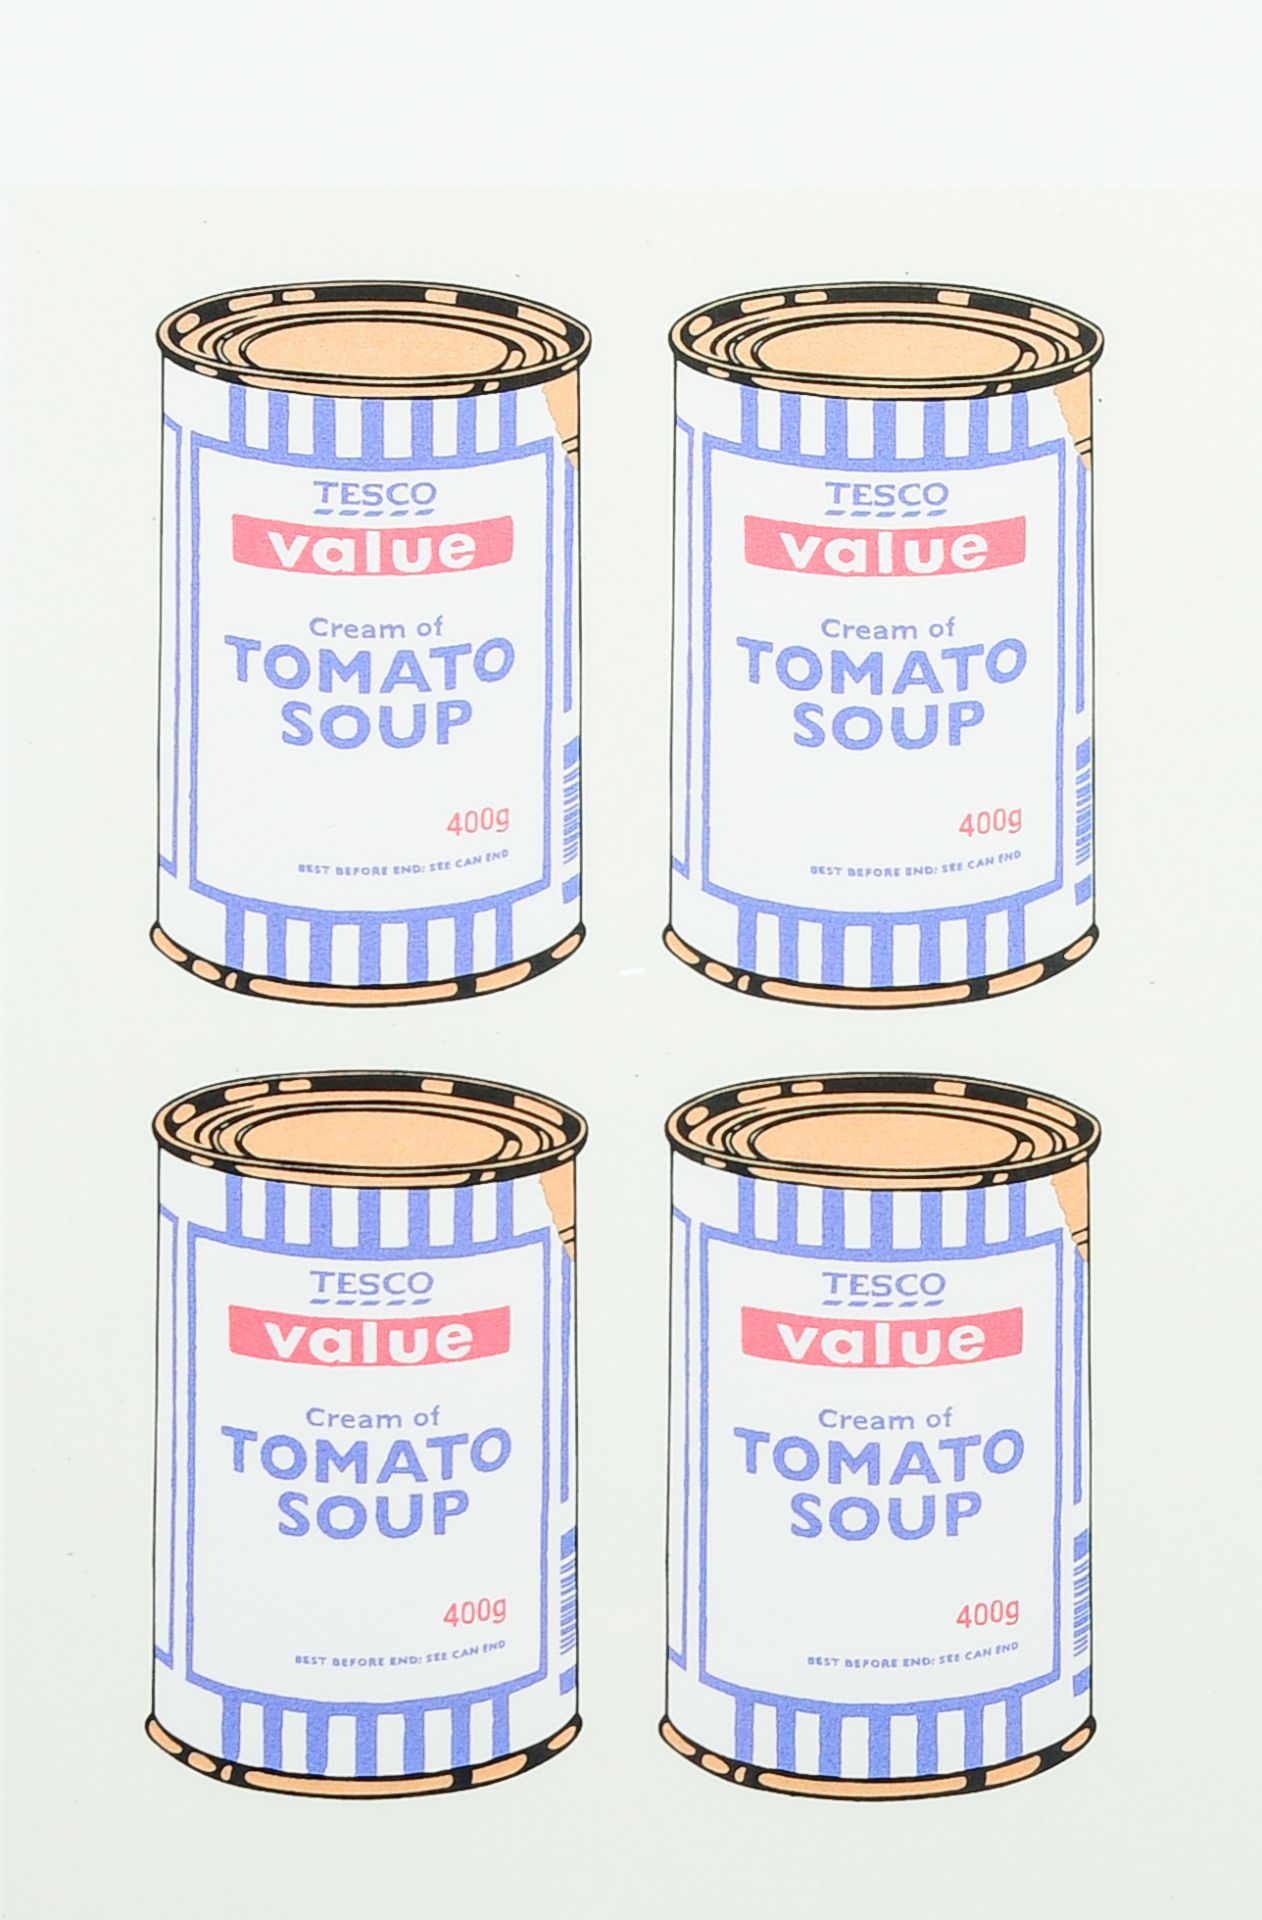 Banksy (1974, after): 'Soup cans', multiple, ed. 79/150